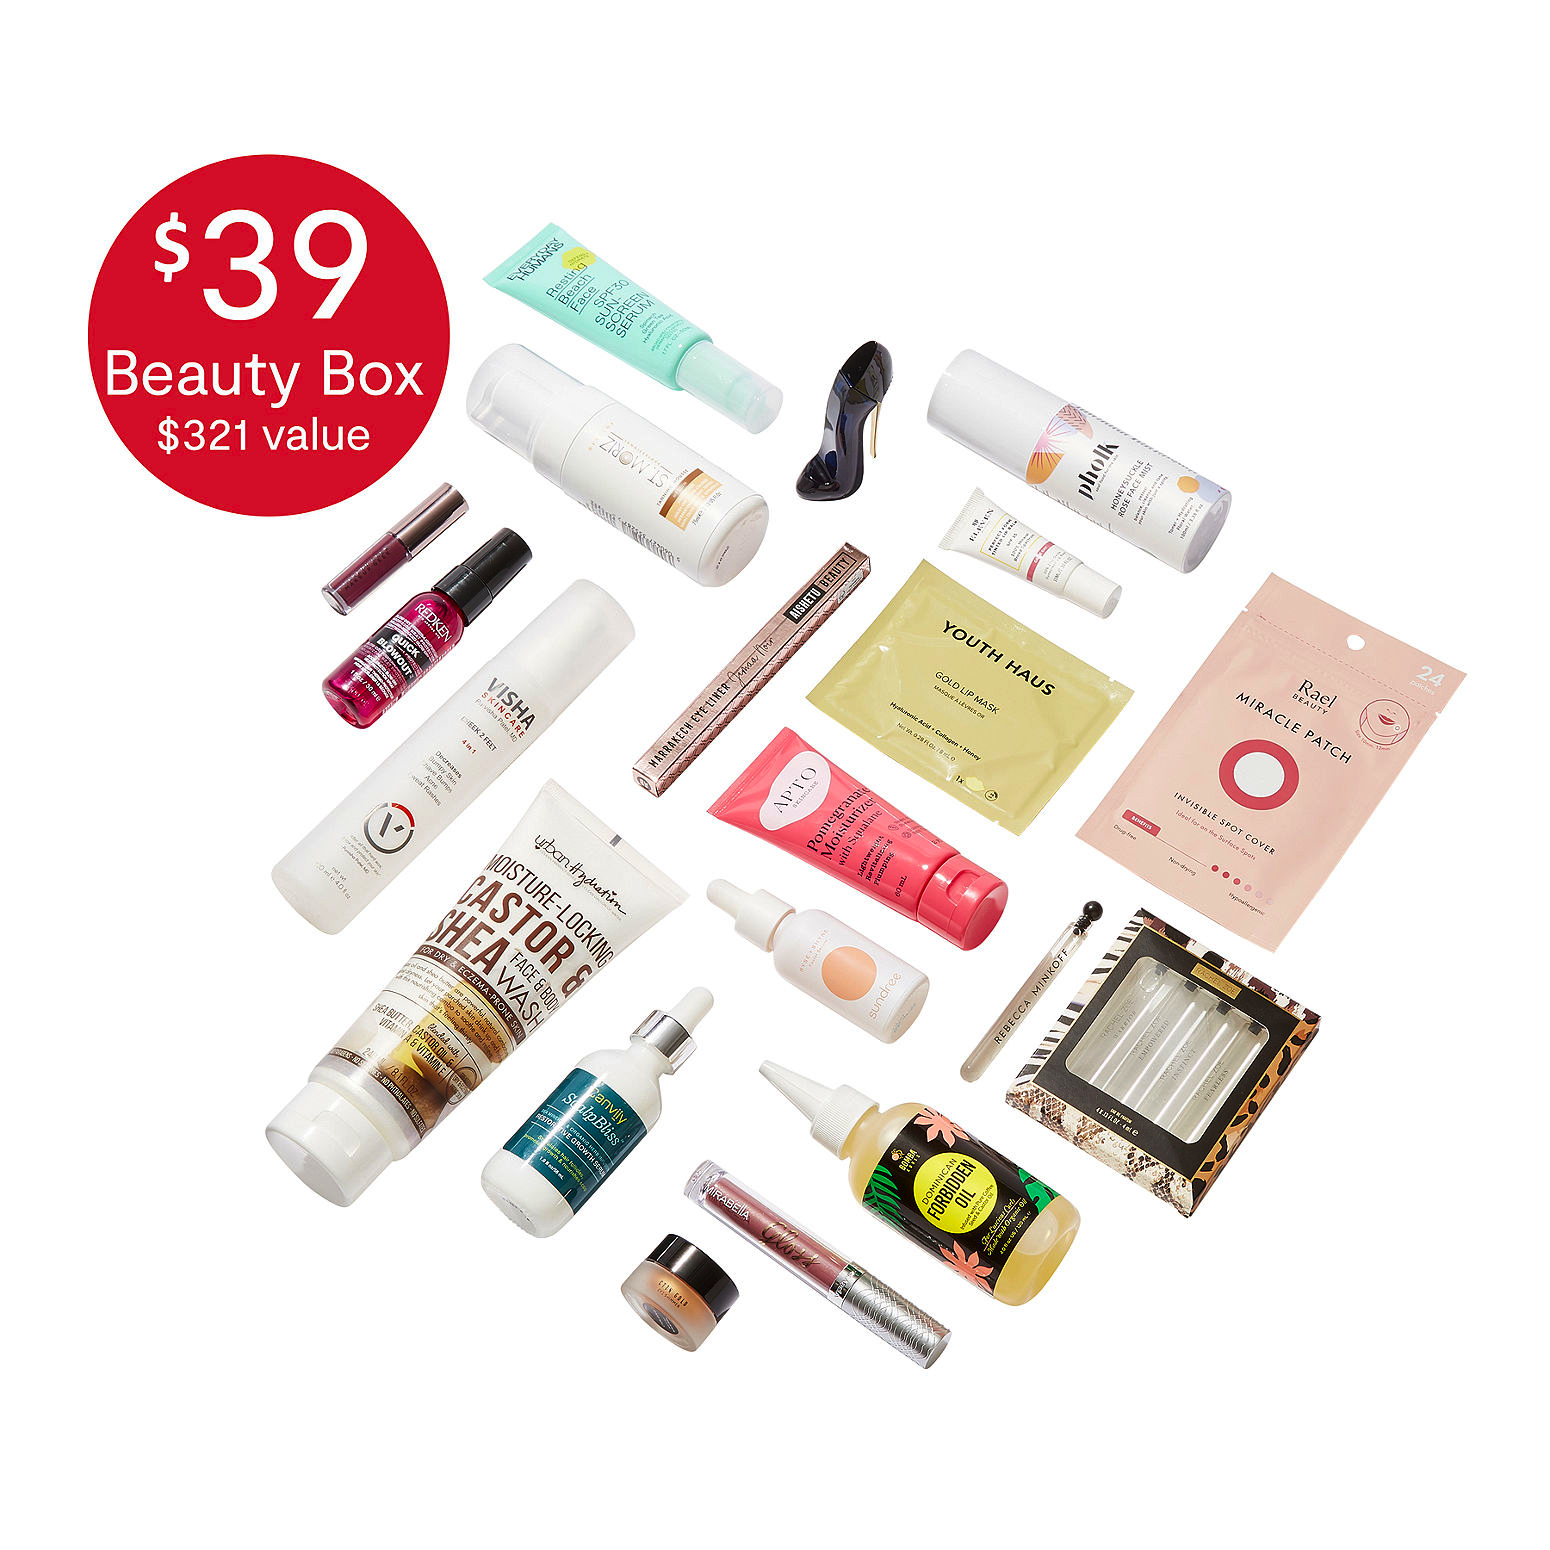 JC Penney Beauty Female-Founded Favorites 20-pc. Beauty Box ($321 Value) for $35.10